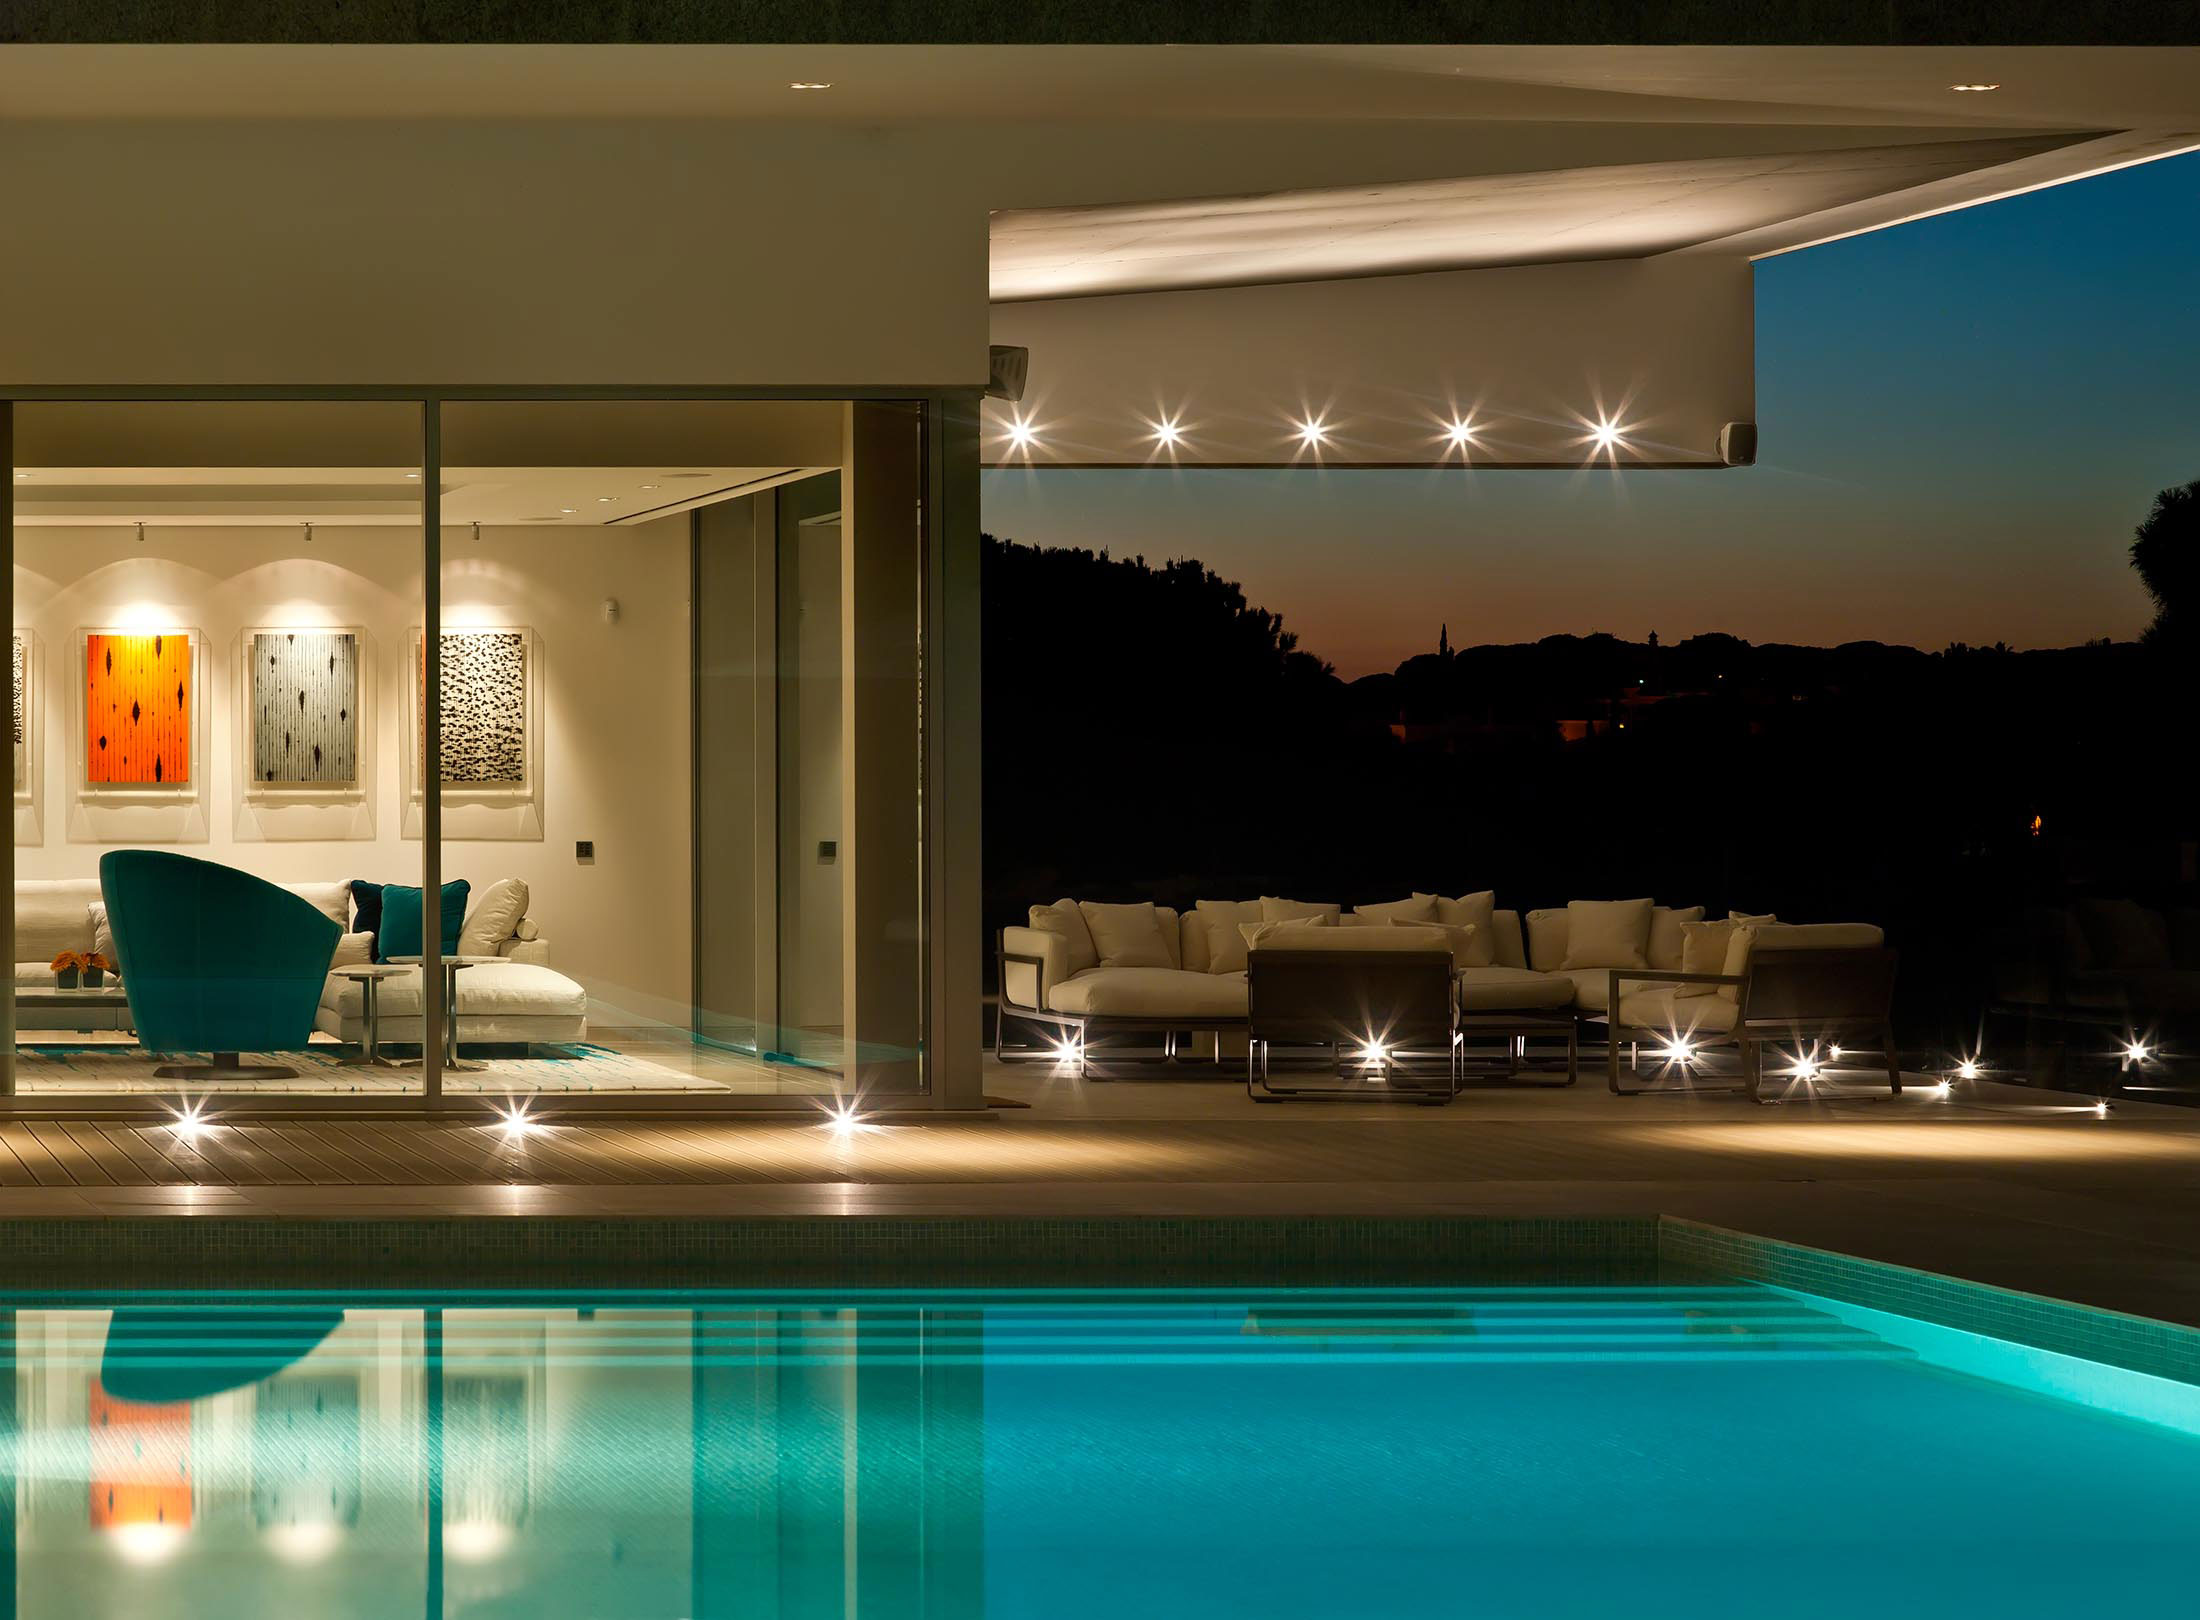 Pool, Evening, Lighting, Family House in Portugal